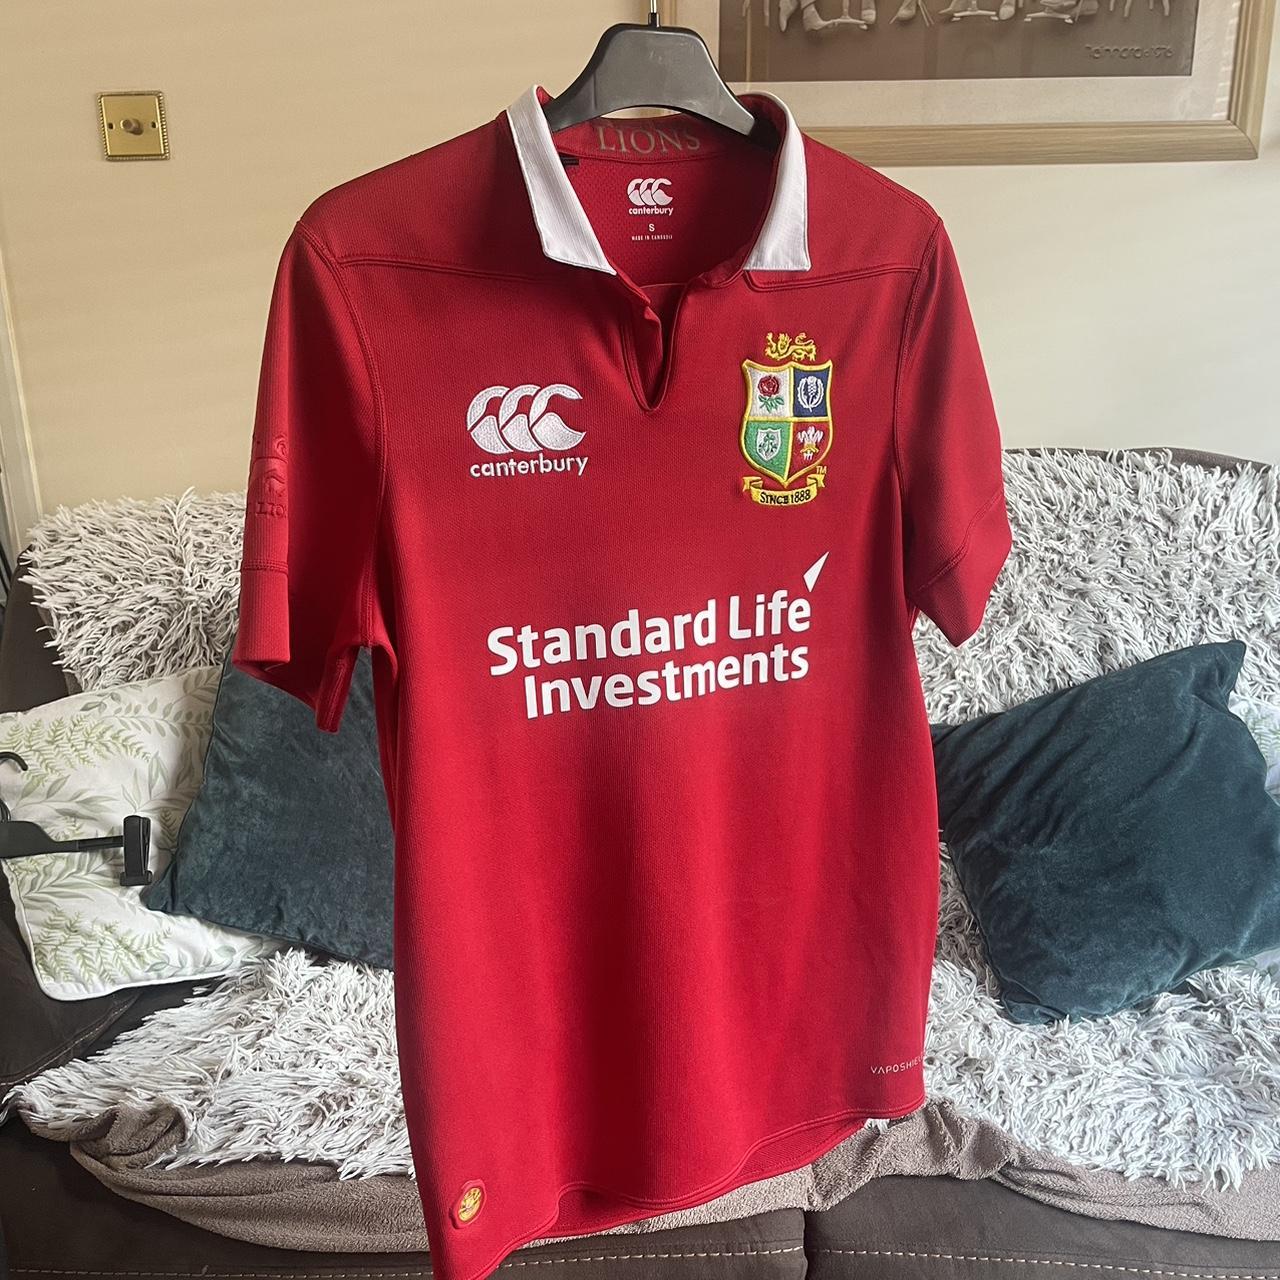 British and Irish Lions rugby jersey Used but in...